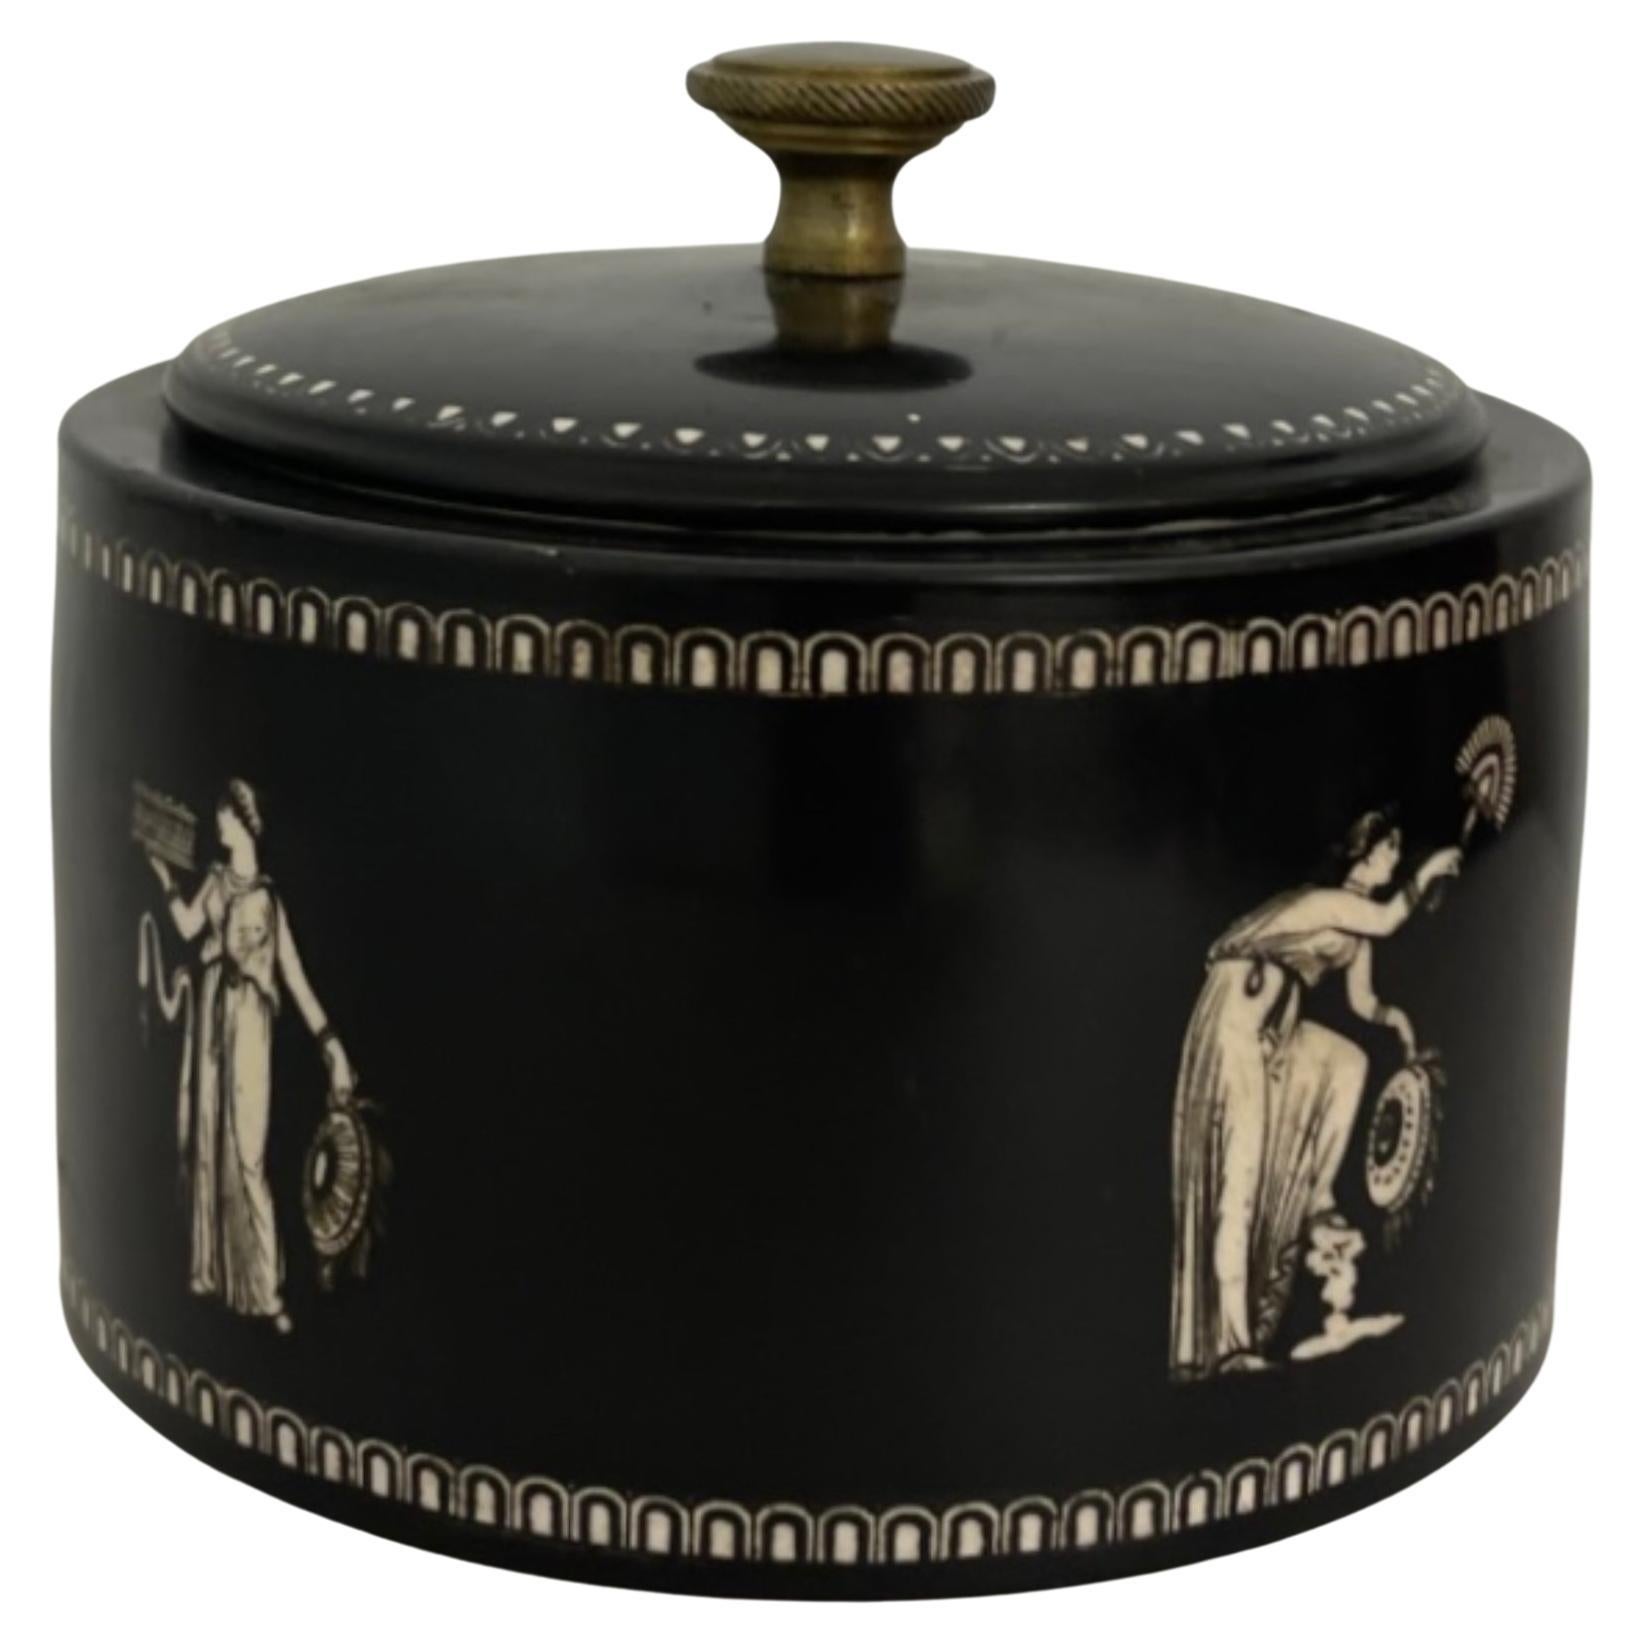 19th-C. English Neo-Classical Style Staffordhire Pottery Biscuit Jar For Sale